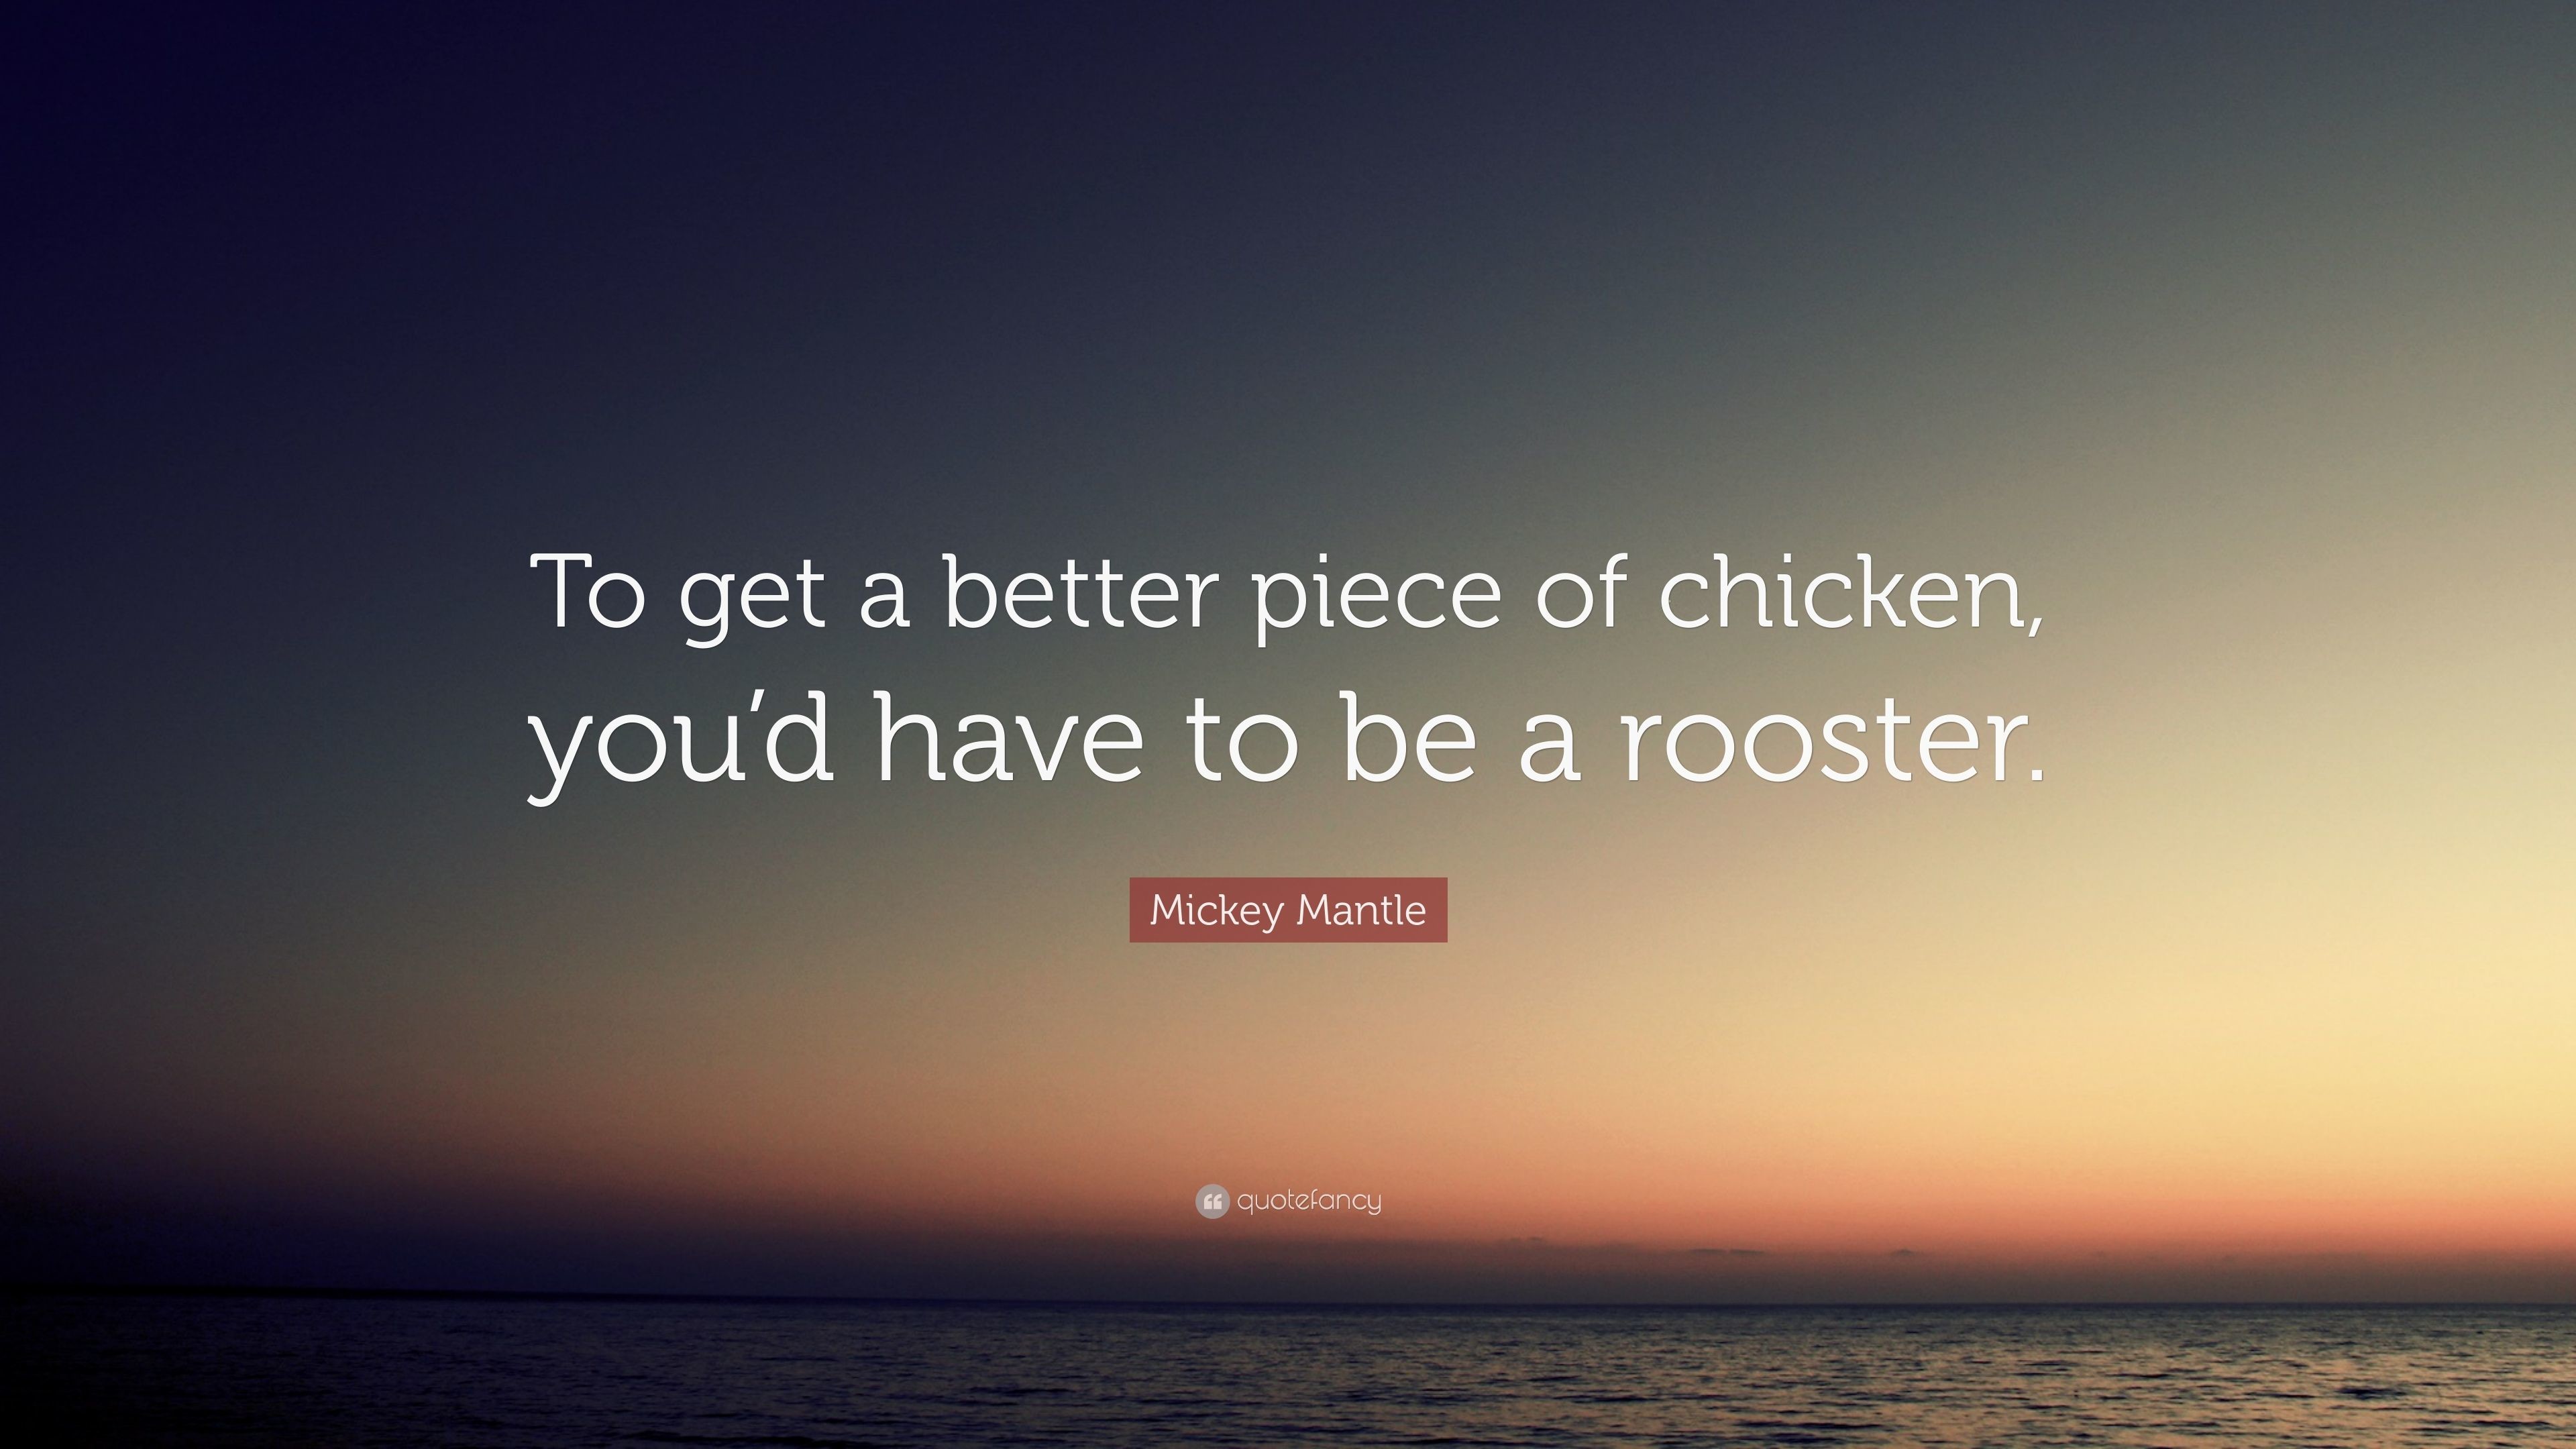 Mickey Mantle Quote To get a better piece of chicken, youd